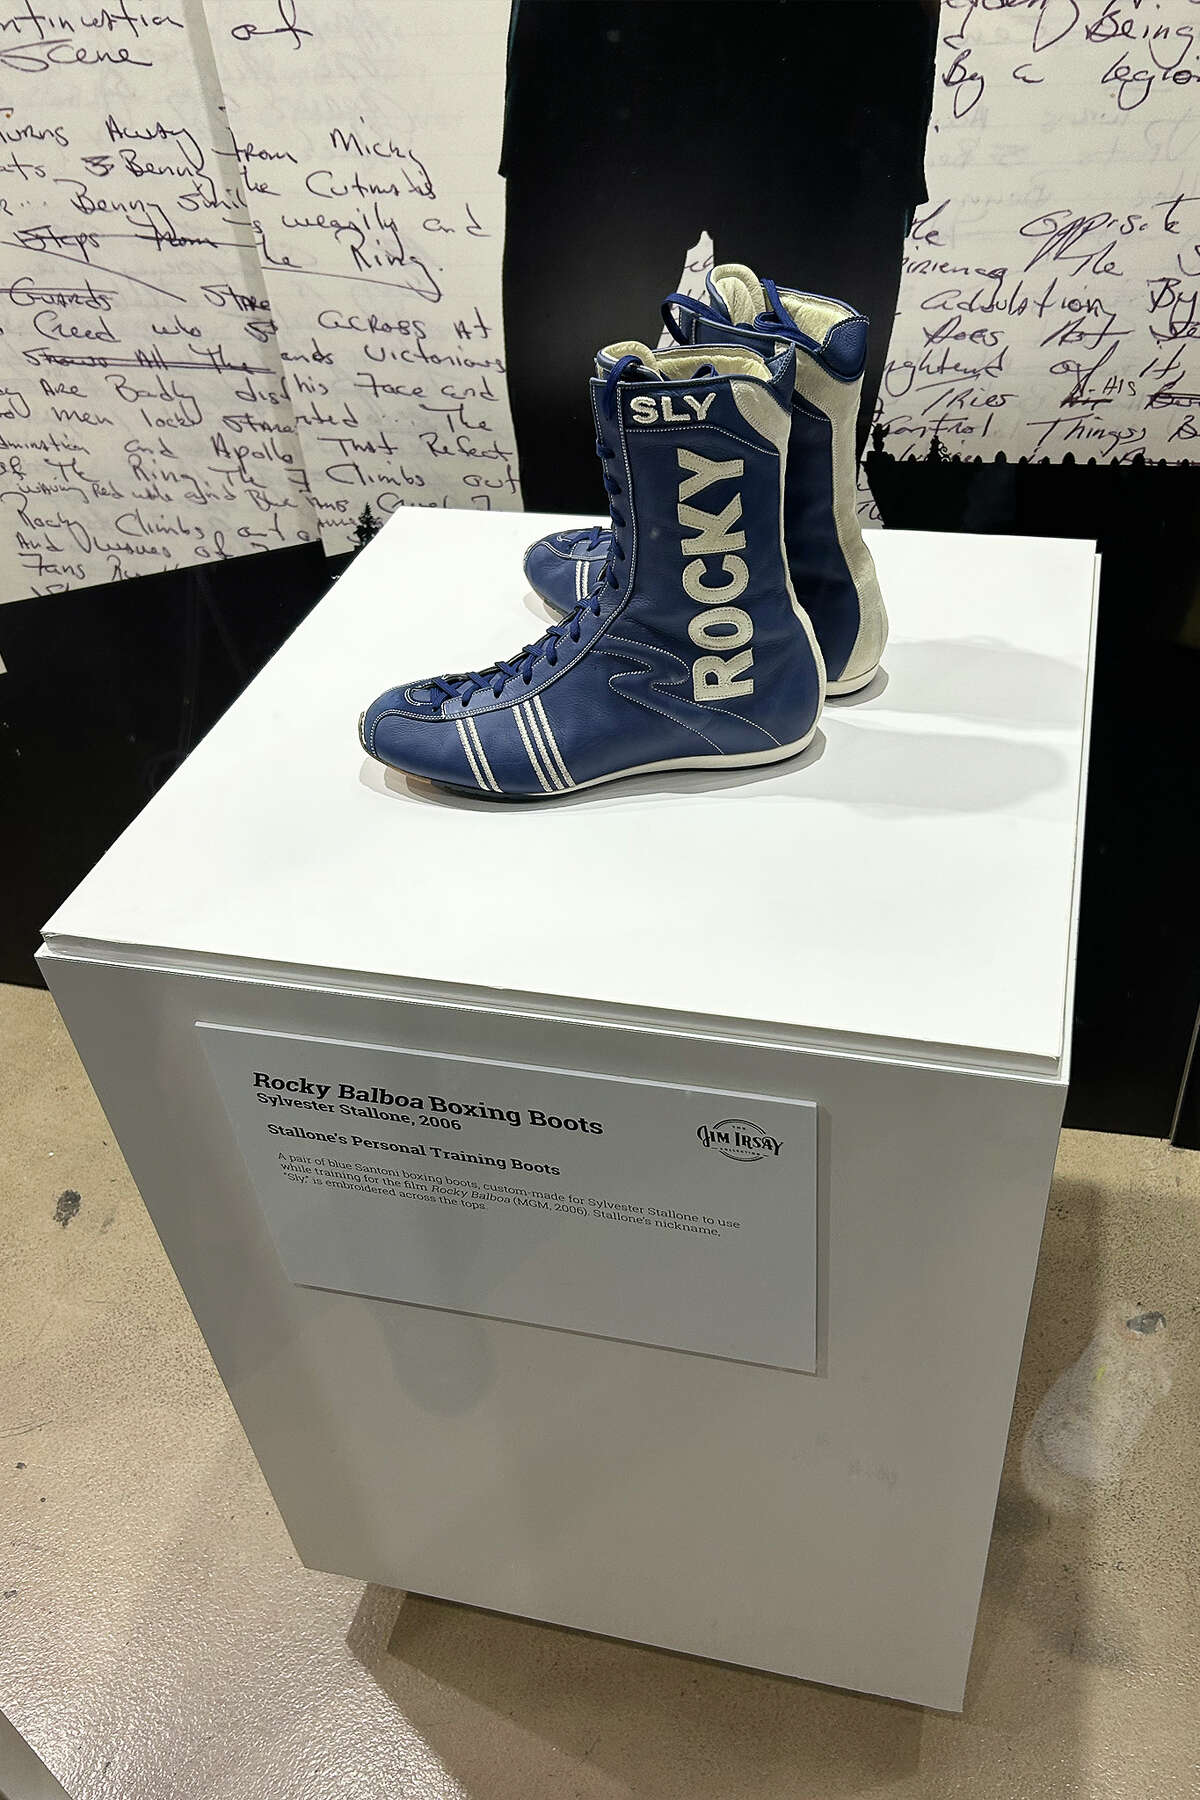 Rocky Balboa's boxing shoes on display as part of the Jim Irsay Collection at Bill Graham Civic Auditorium in San Francisco, California, on Dec. 10, 2022.